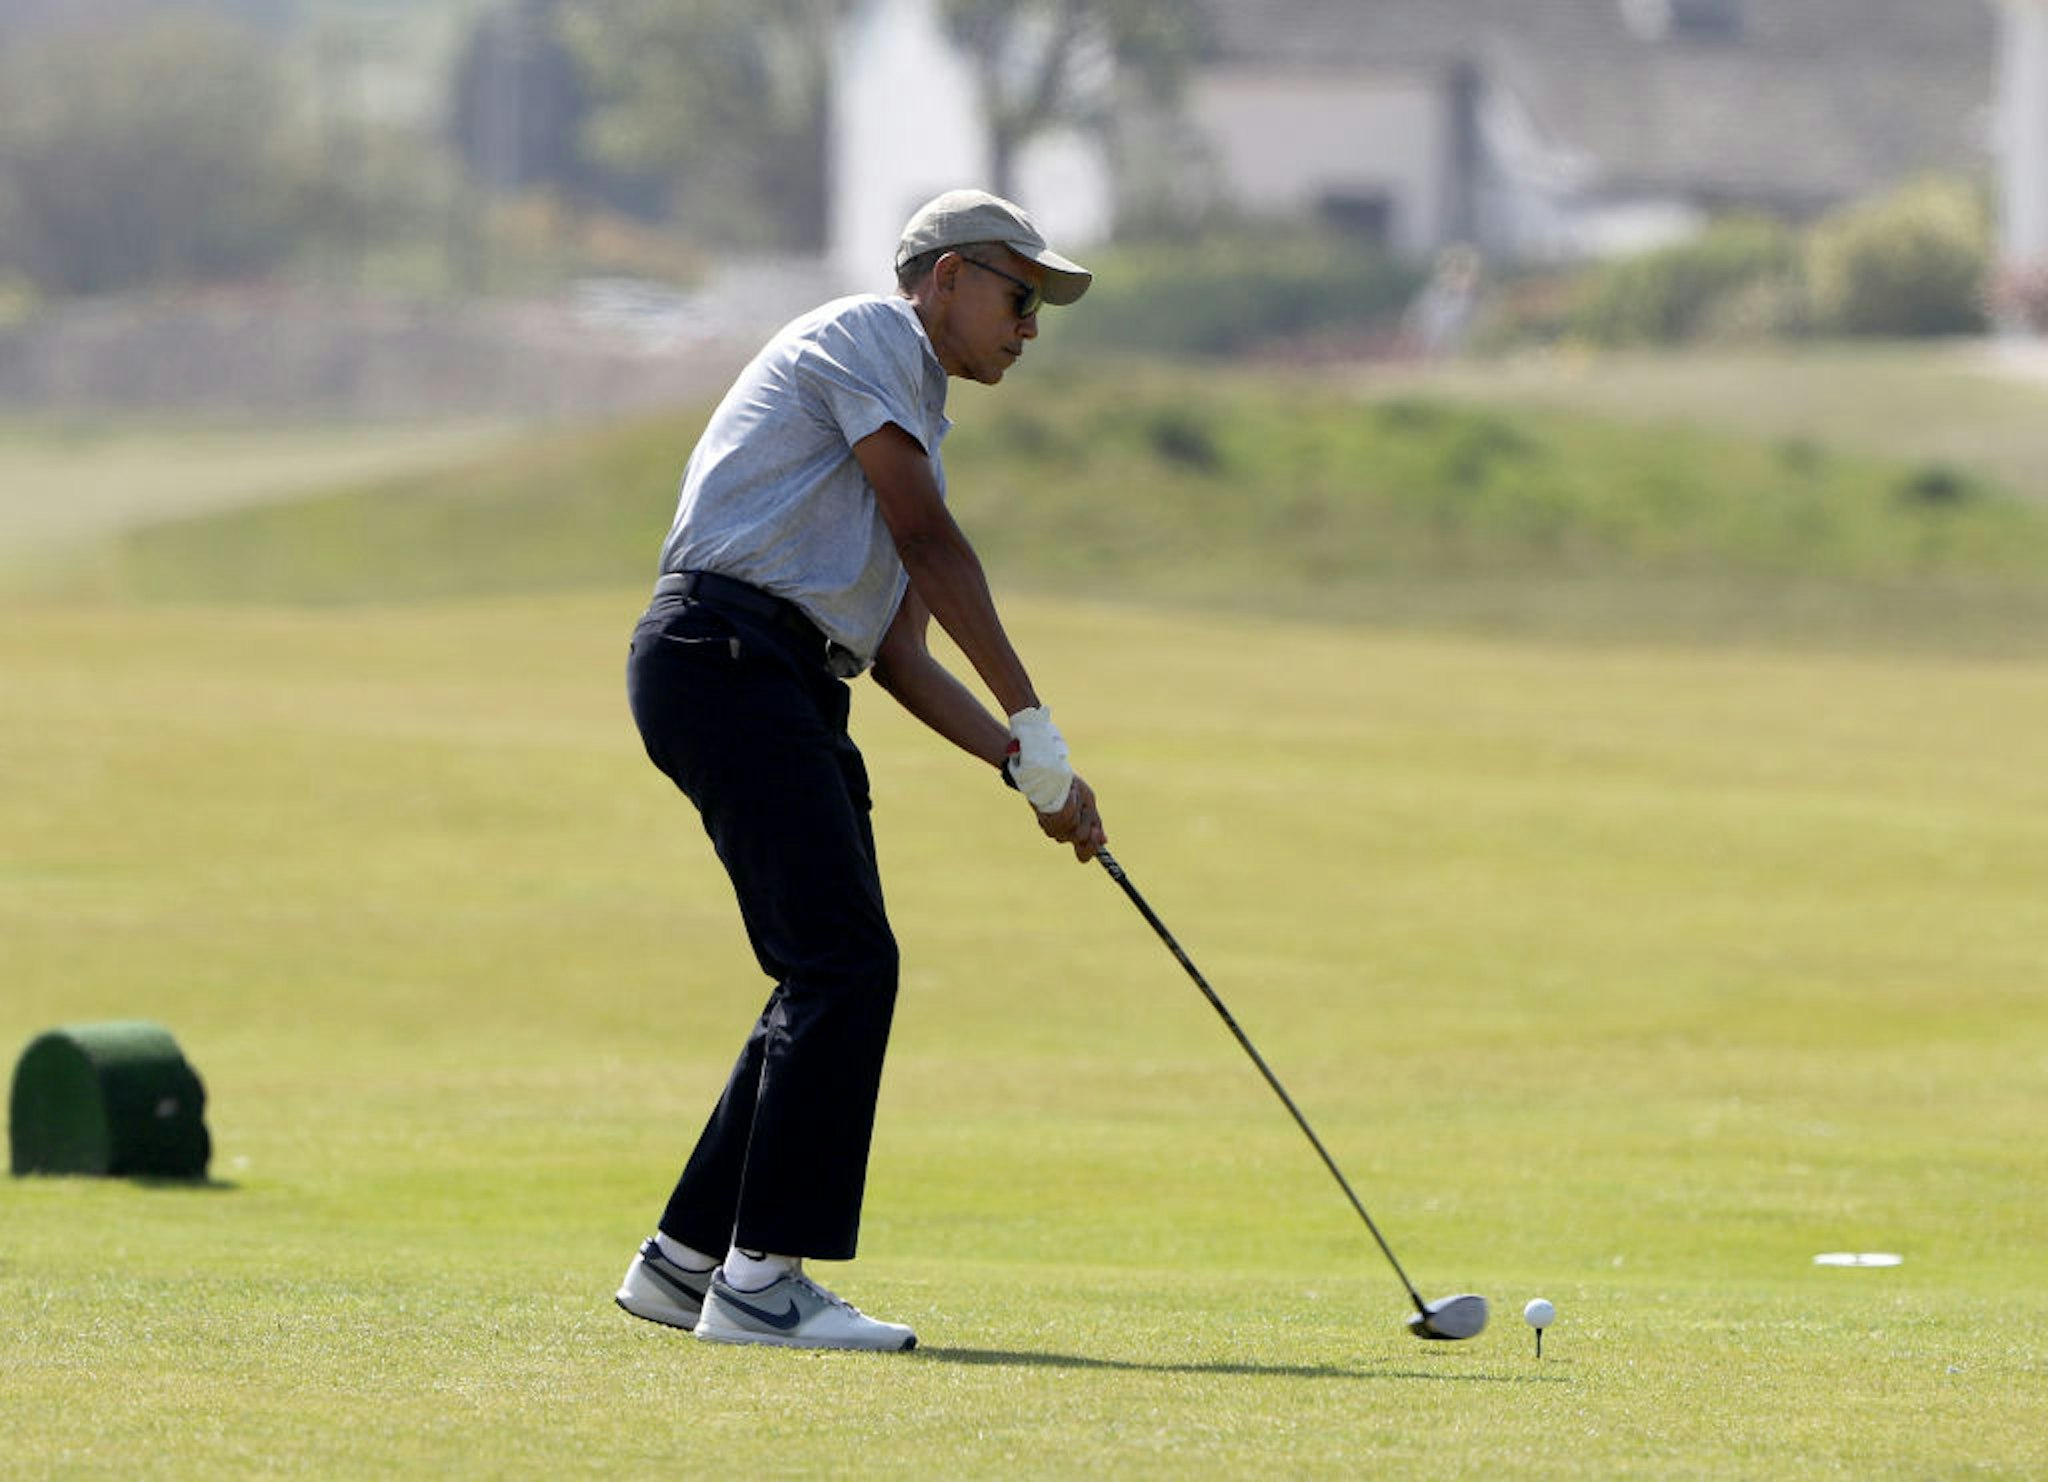 Former US President Barack Obama during a round of golf on the Old Course at St Andrews during a Visit to Scotland